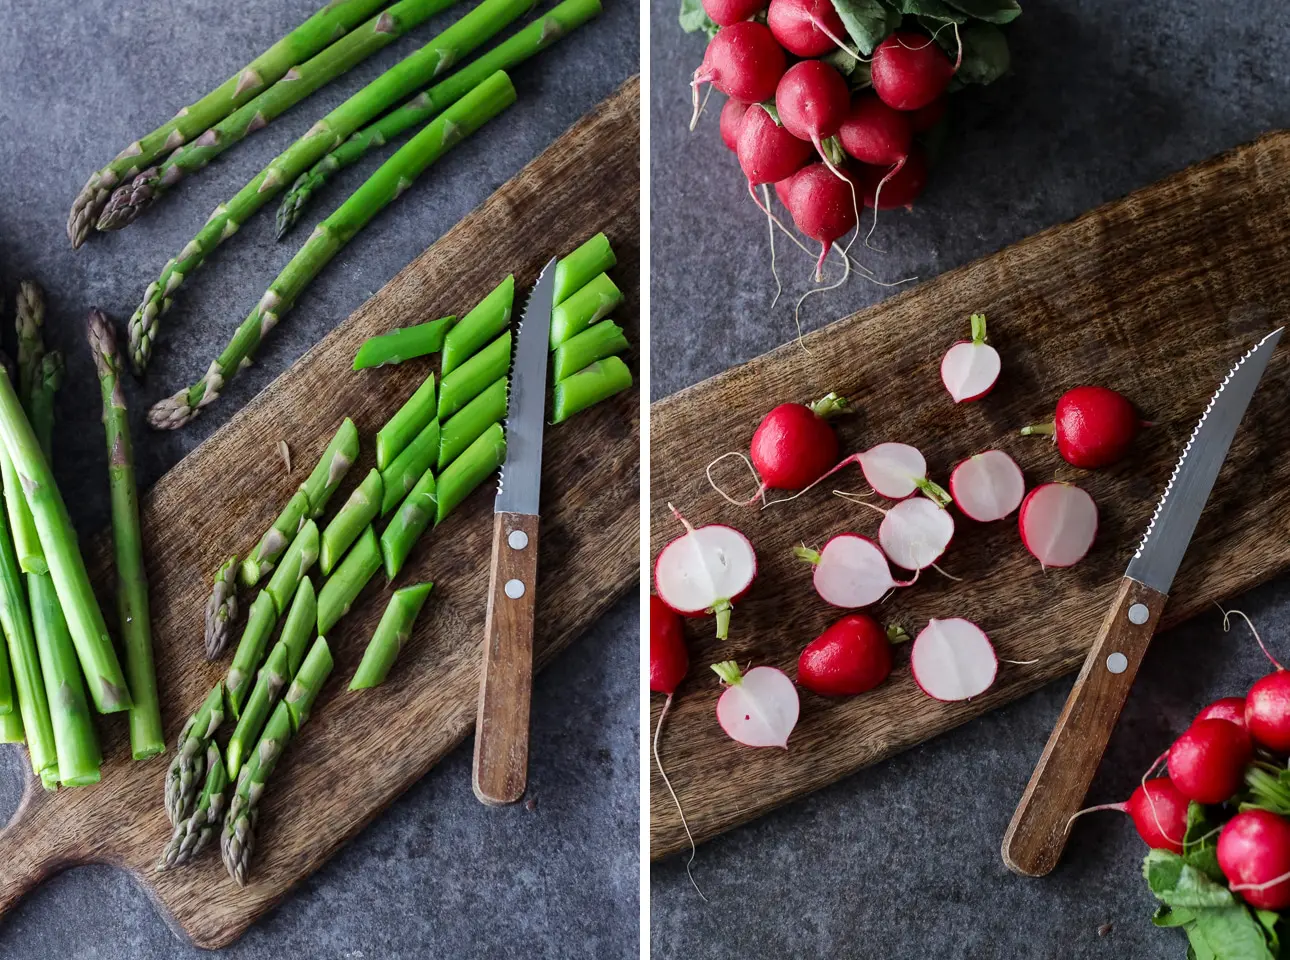 Cutting Asparagus and Radishes on a Wooden Board